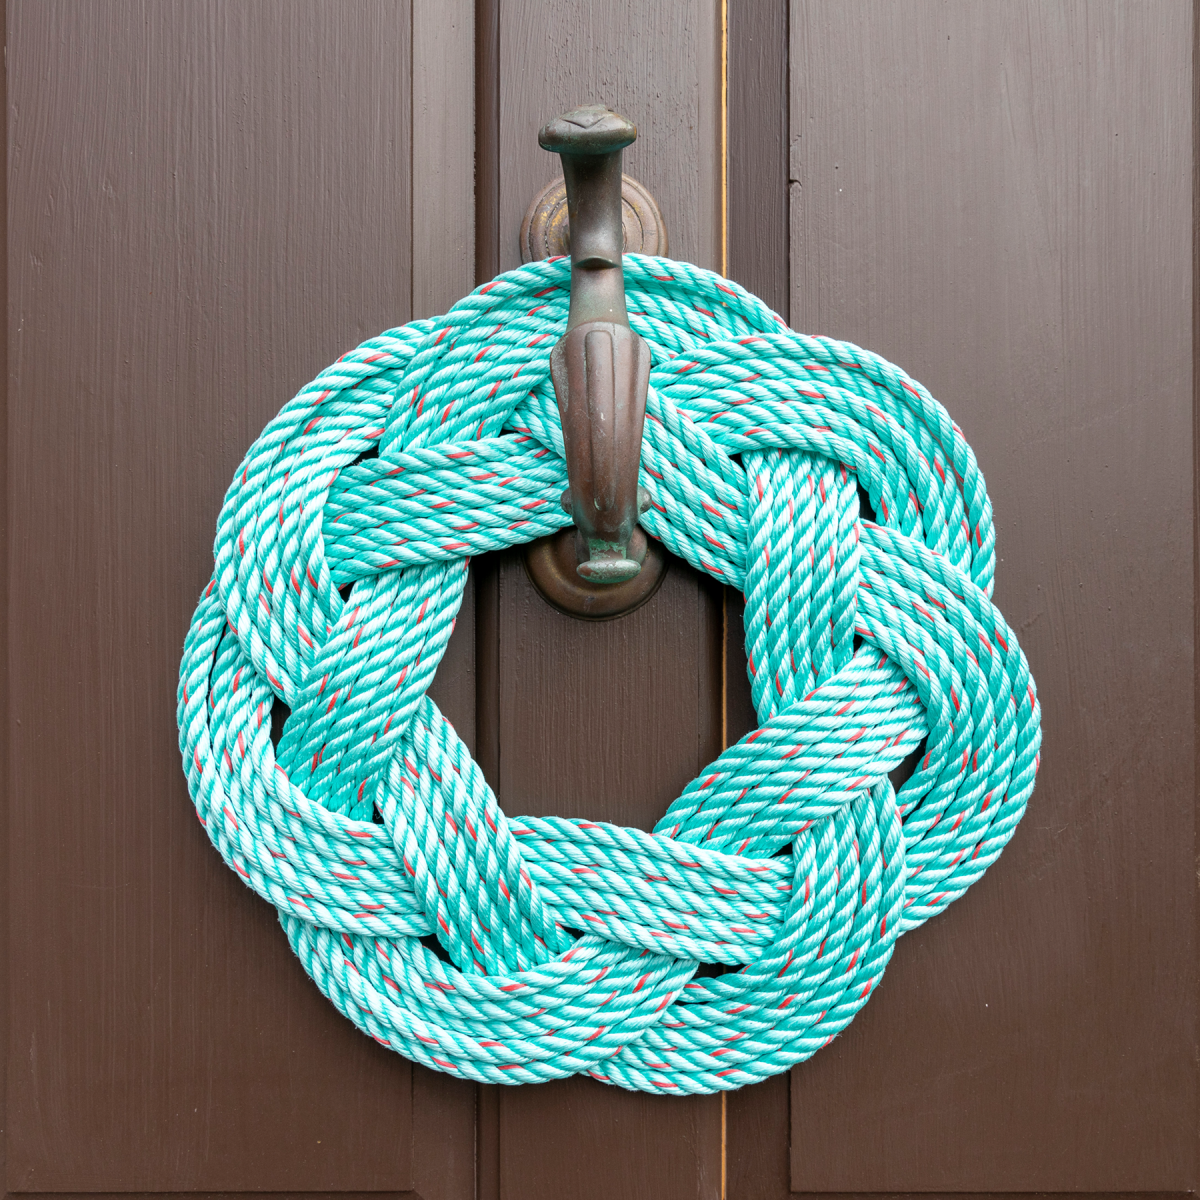 Colorful Rope Sailors’ Knot Wreaths